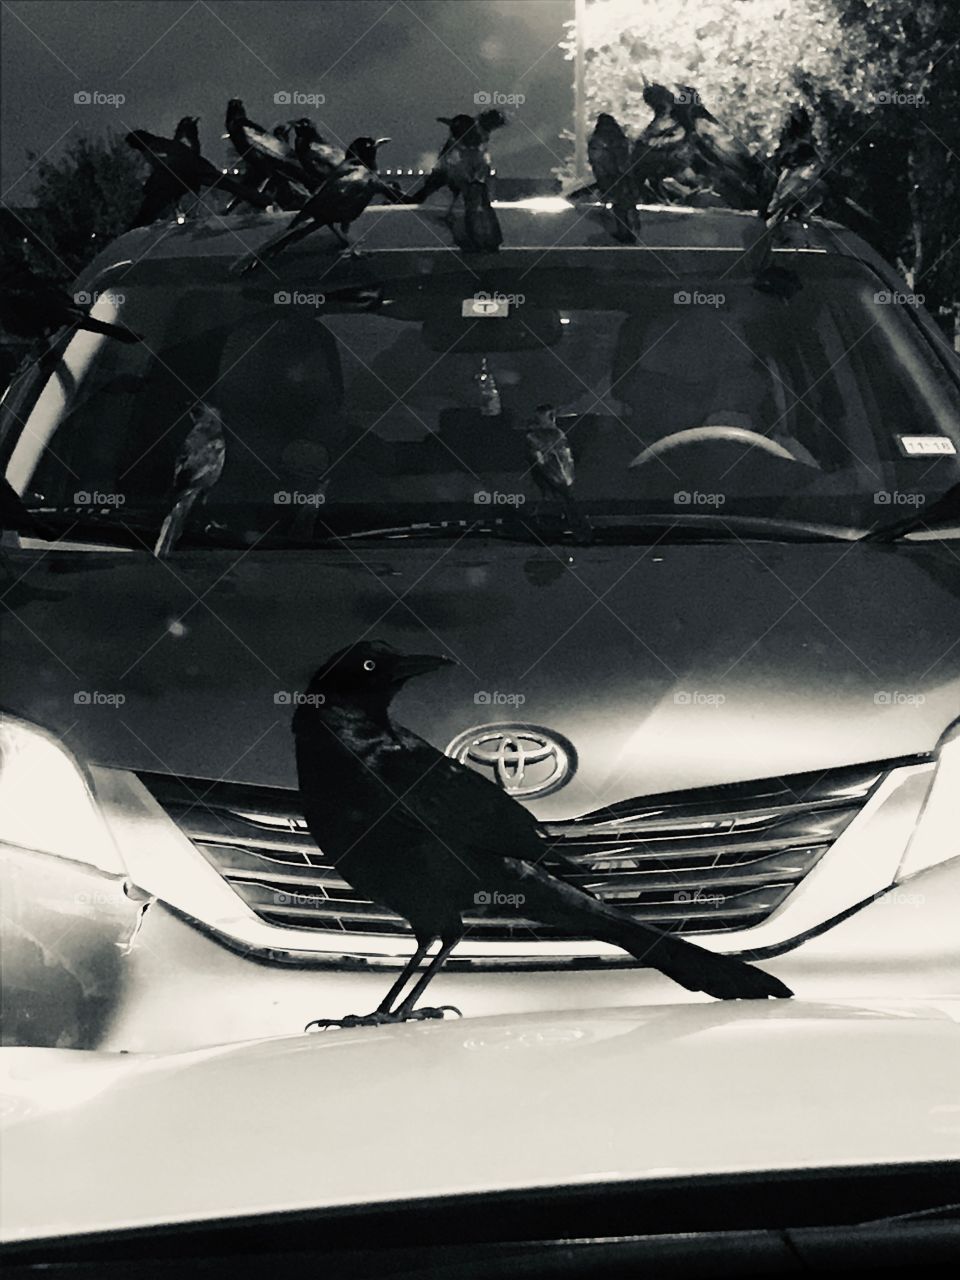 Black and White Grackle Birds on Toyota SUV